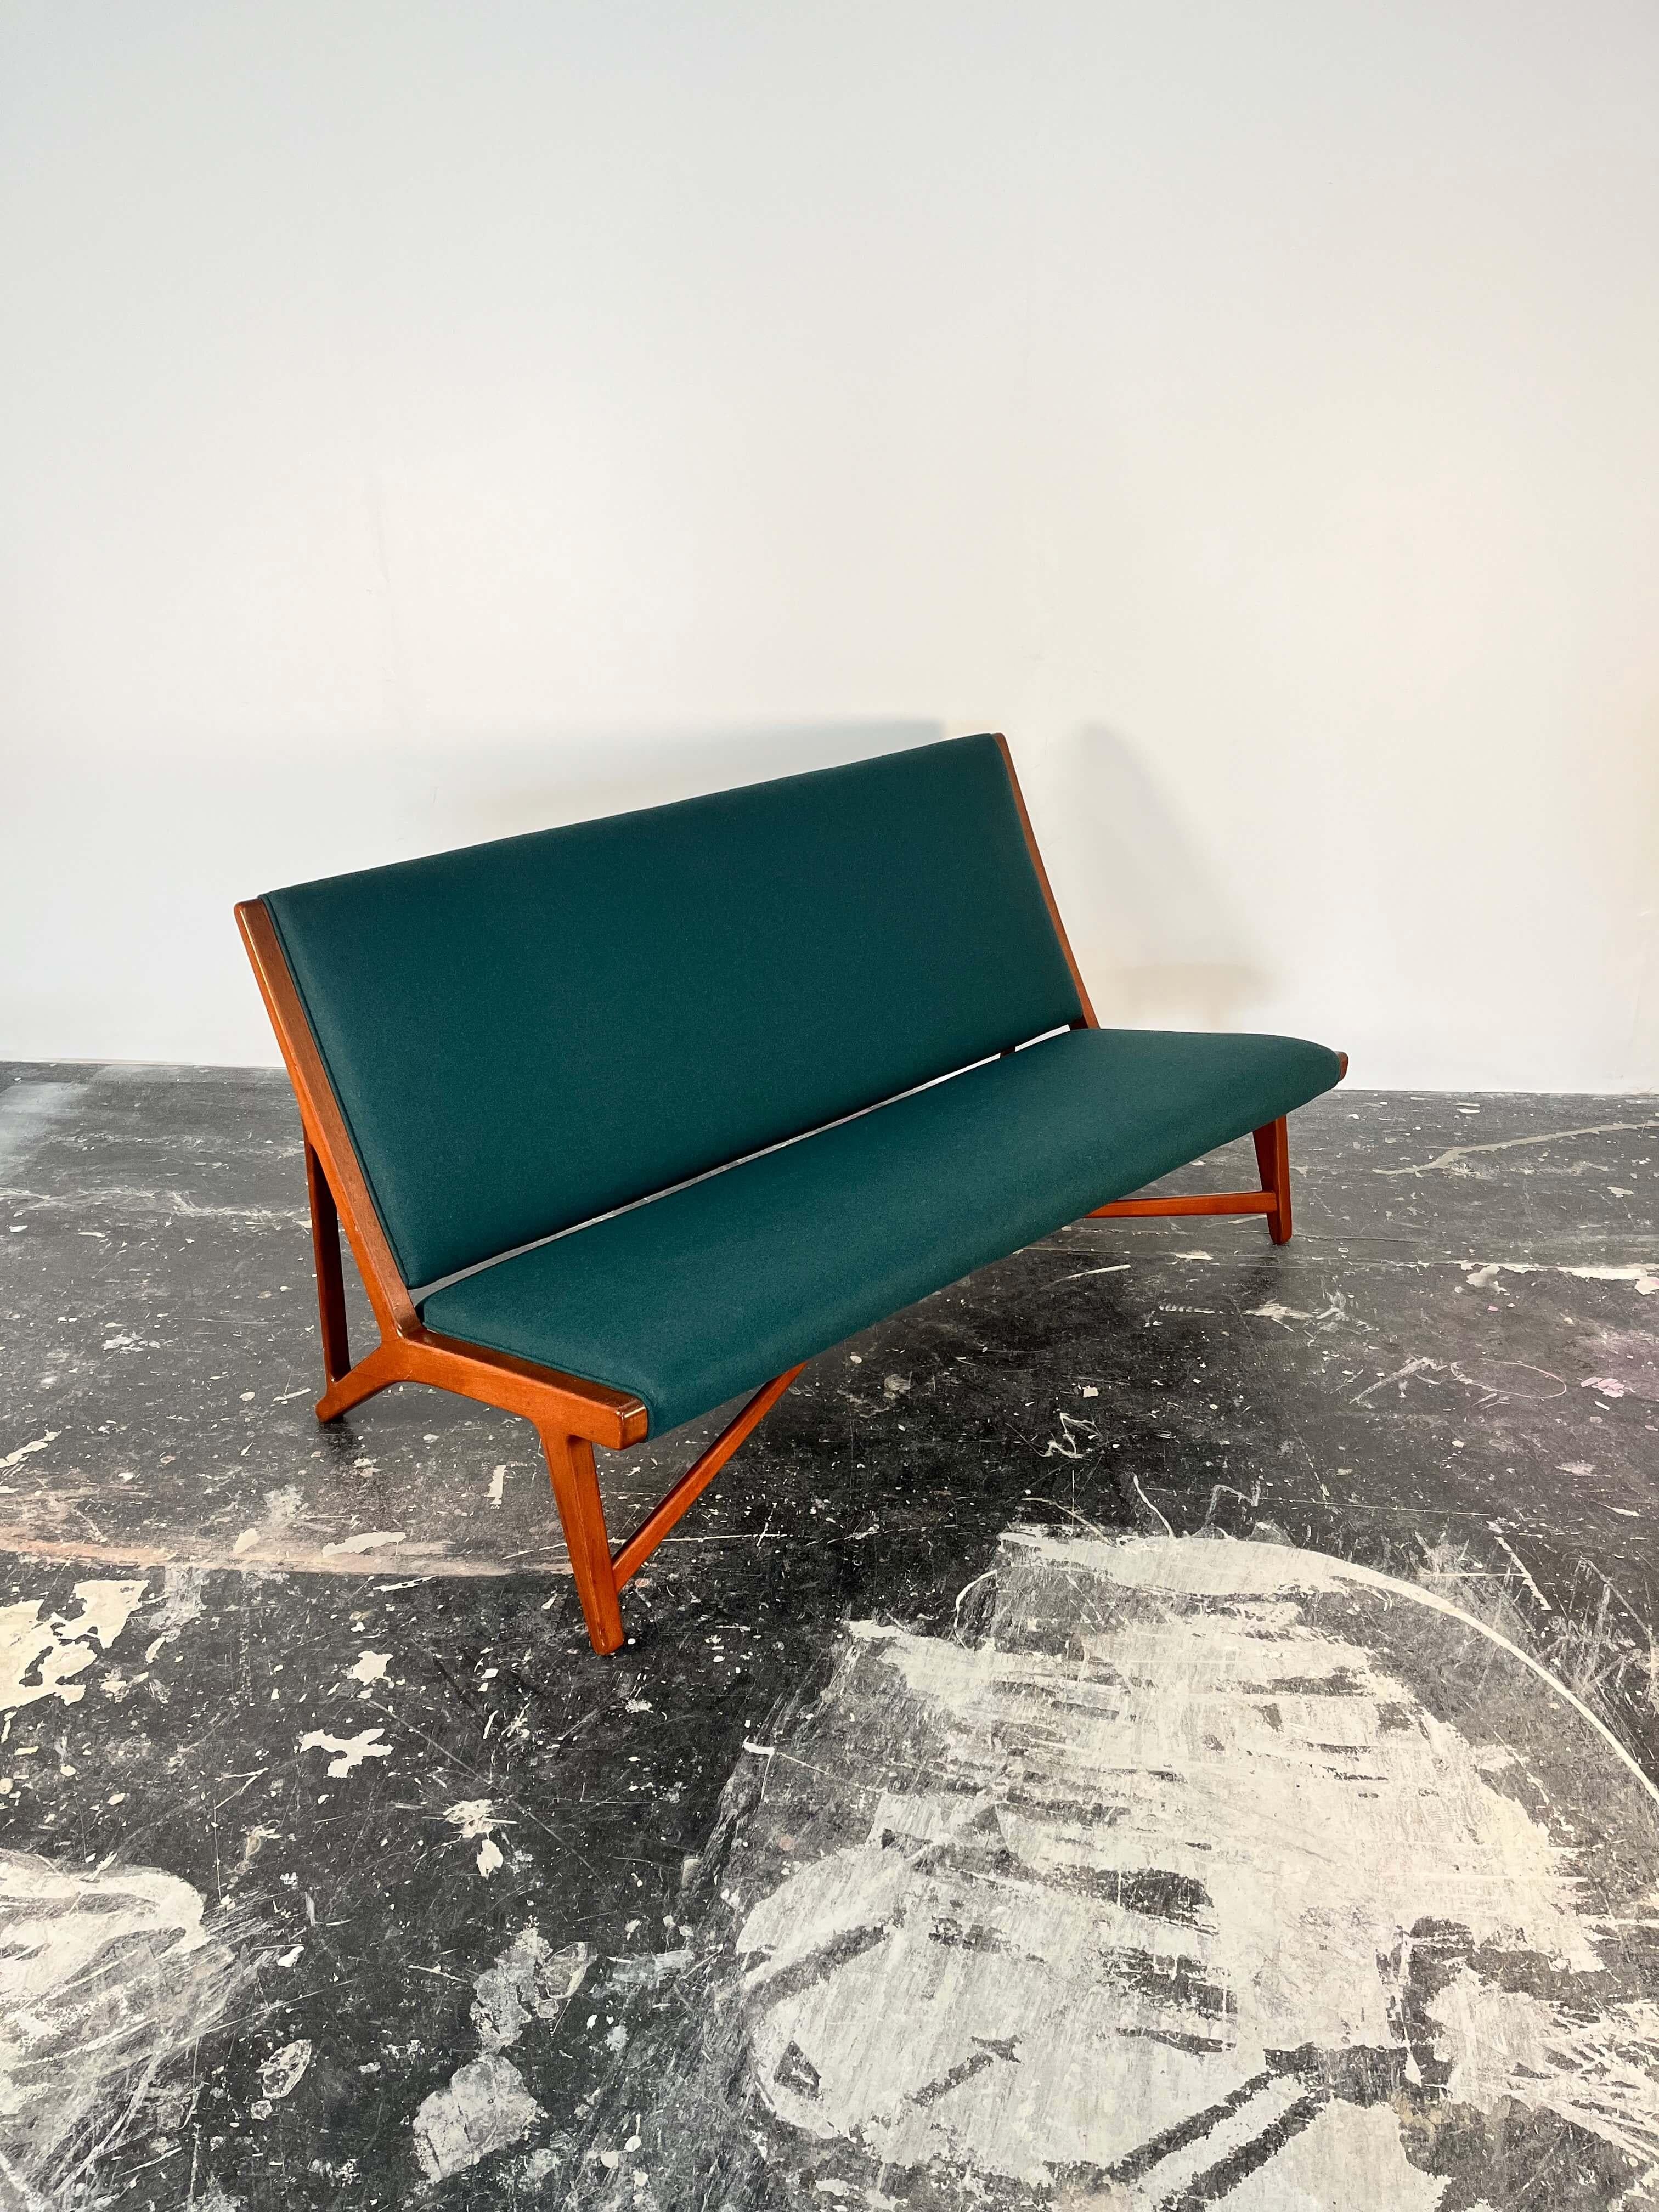 We are so excited to present this gorgeous rare Hans J. Wegner Settee For Johannes Hansen, Model JH 555, with slanted upholstered seat and back, on a teak base, in new rich green wool. Branded with the manufacturer's stamp with monogram on the